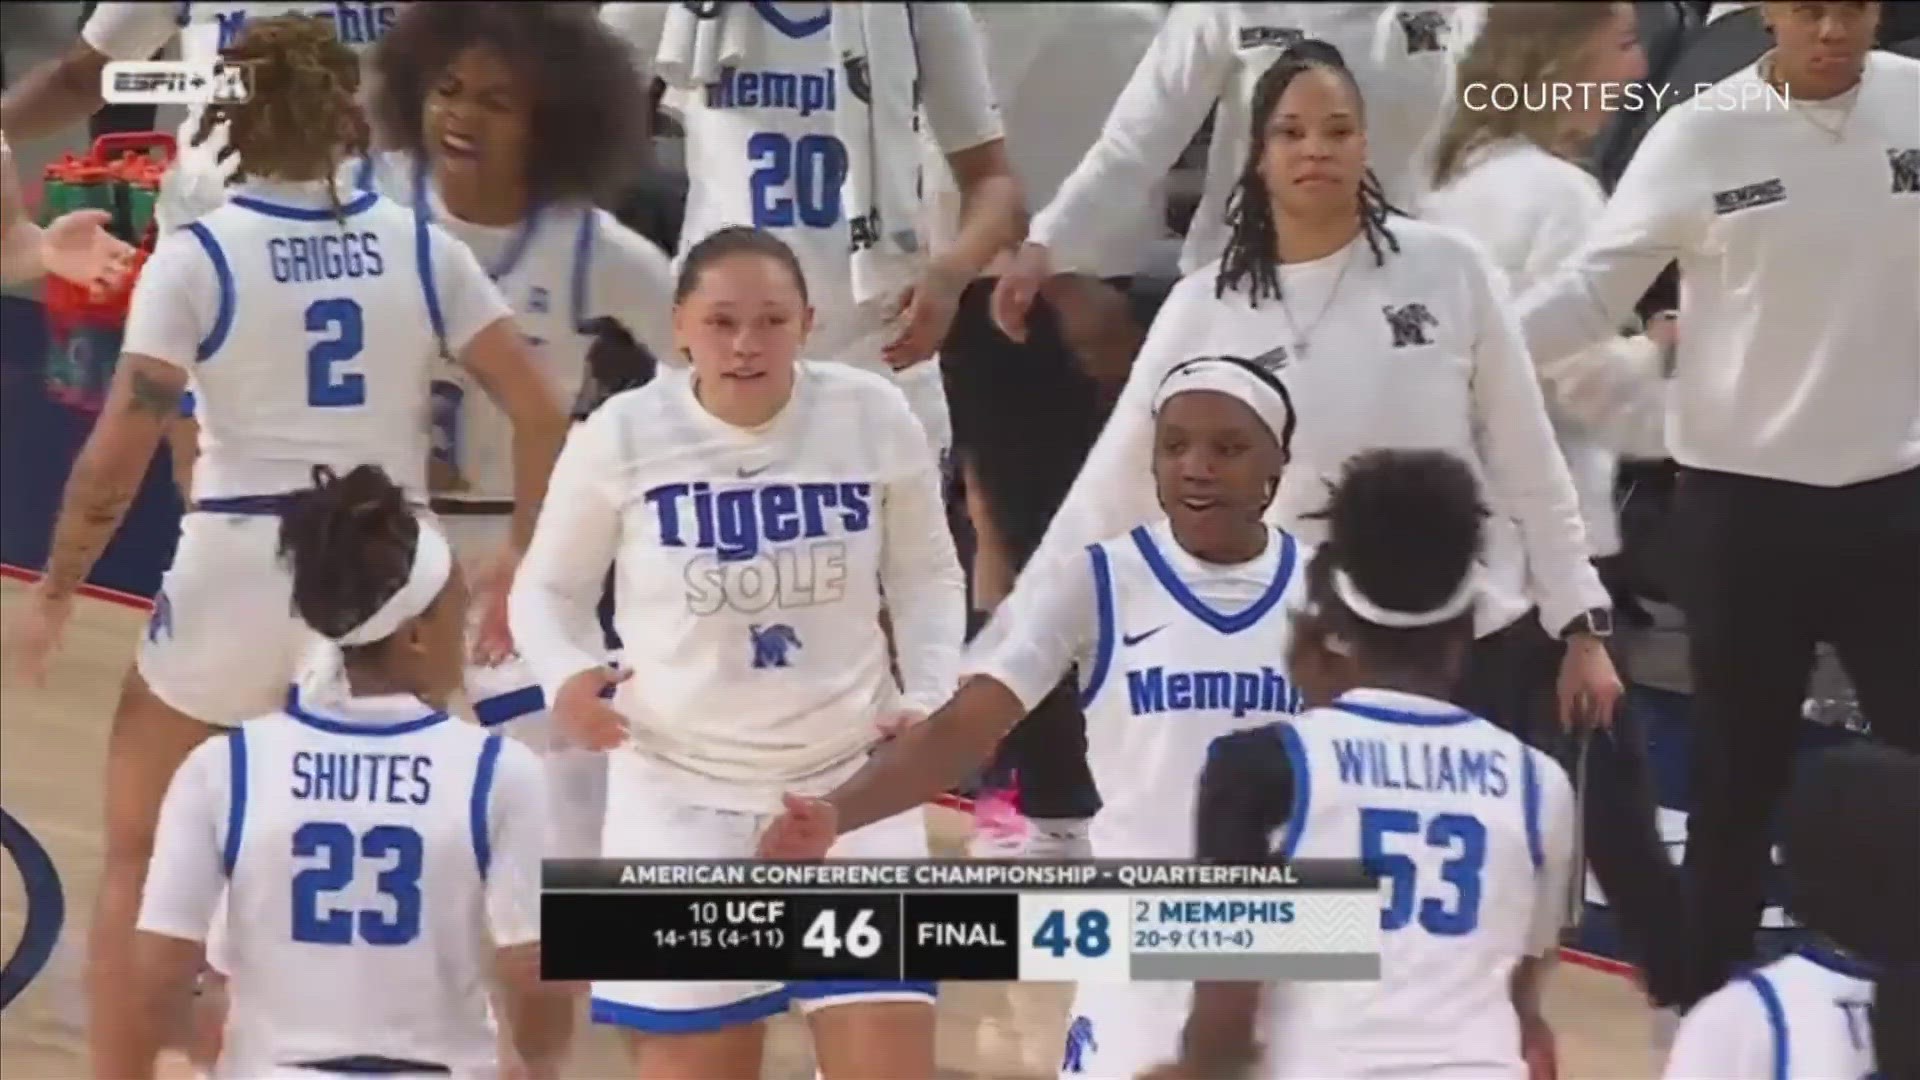 Tigers Women take on Jackson State in Memphis in WNIT First Round localmemphis